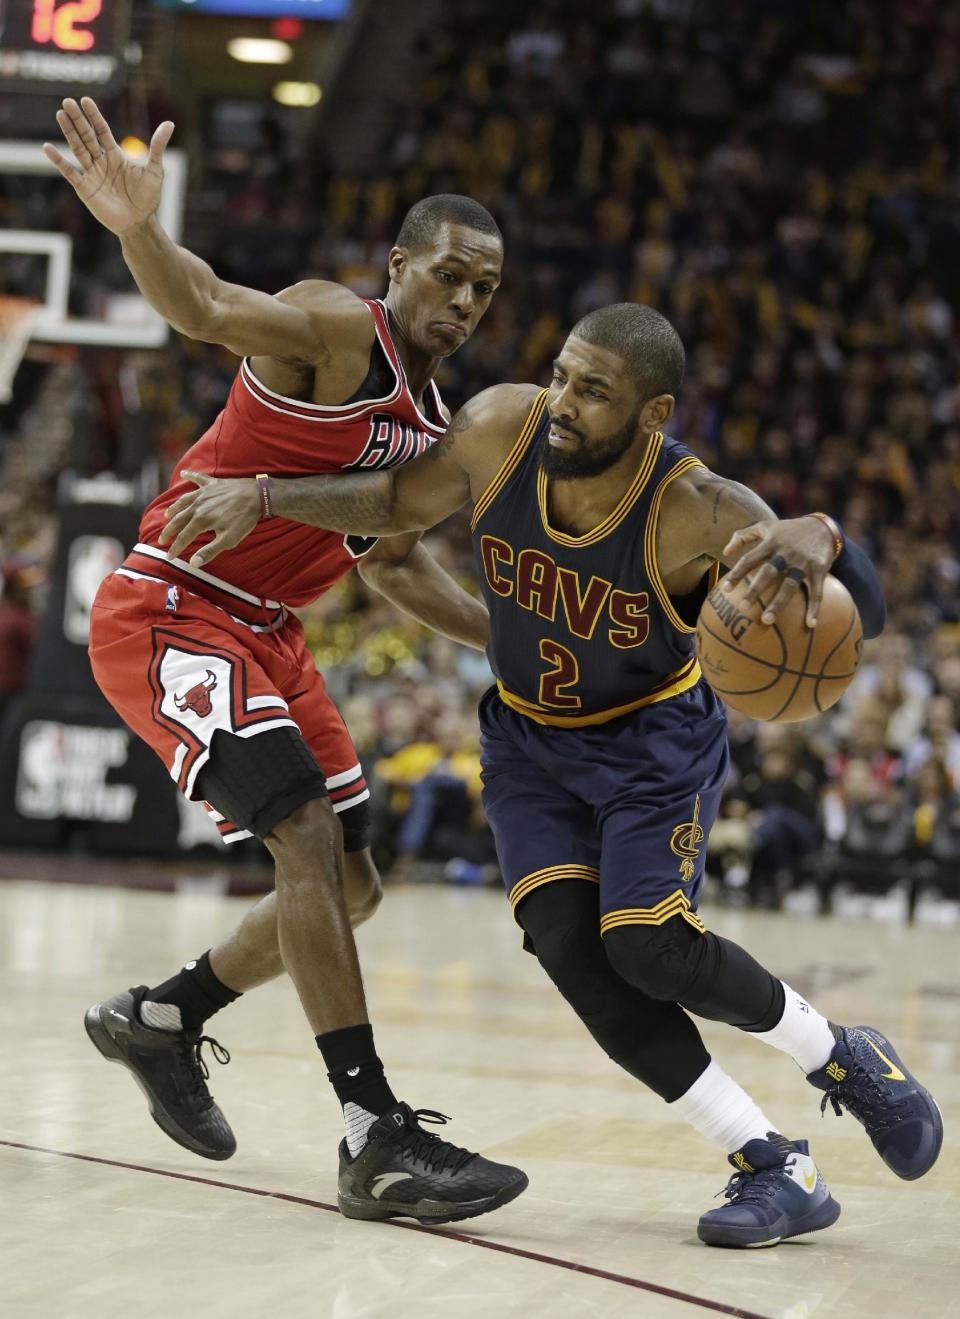 Cleveland Cavaliers' Kyrie Irving (2) drives past Chicago Bulls' Rajon Rondo (9) during the second half of an NBA basketball game, Saturday, Feb. 25, 2017, in Cleveland. The Bulls won 117-99. (AP Photo/Tony Dejak)